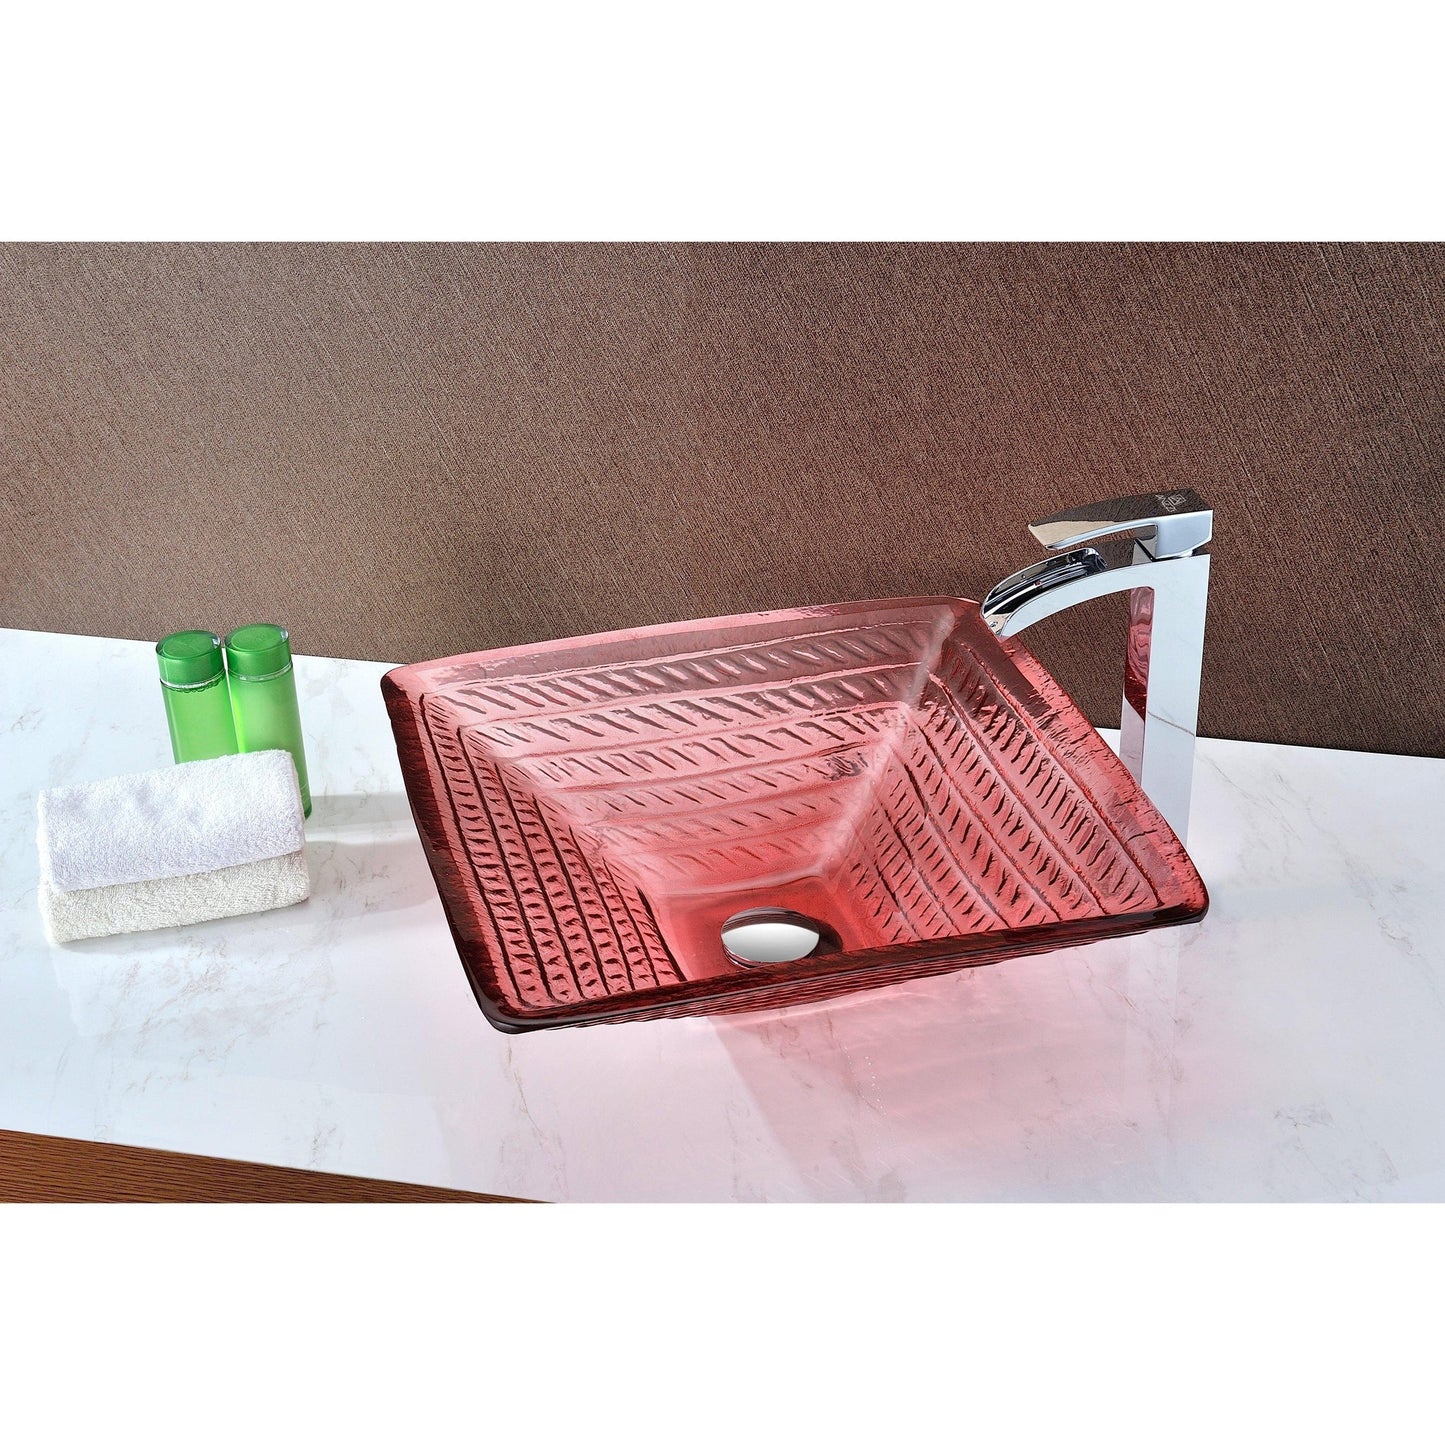 ANZZI Nono Series 18" x 18" Square Shape Lustrous Translucent Red Deco-Glass Vessel Sink With Polished Chrome Pop-Up Drain